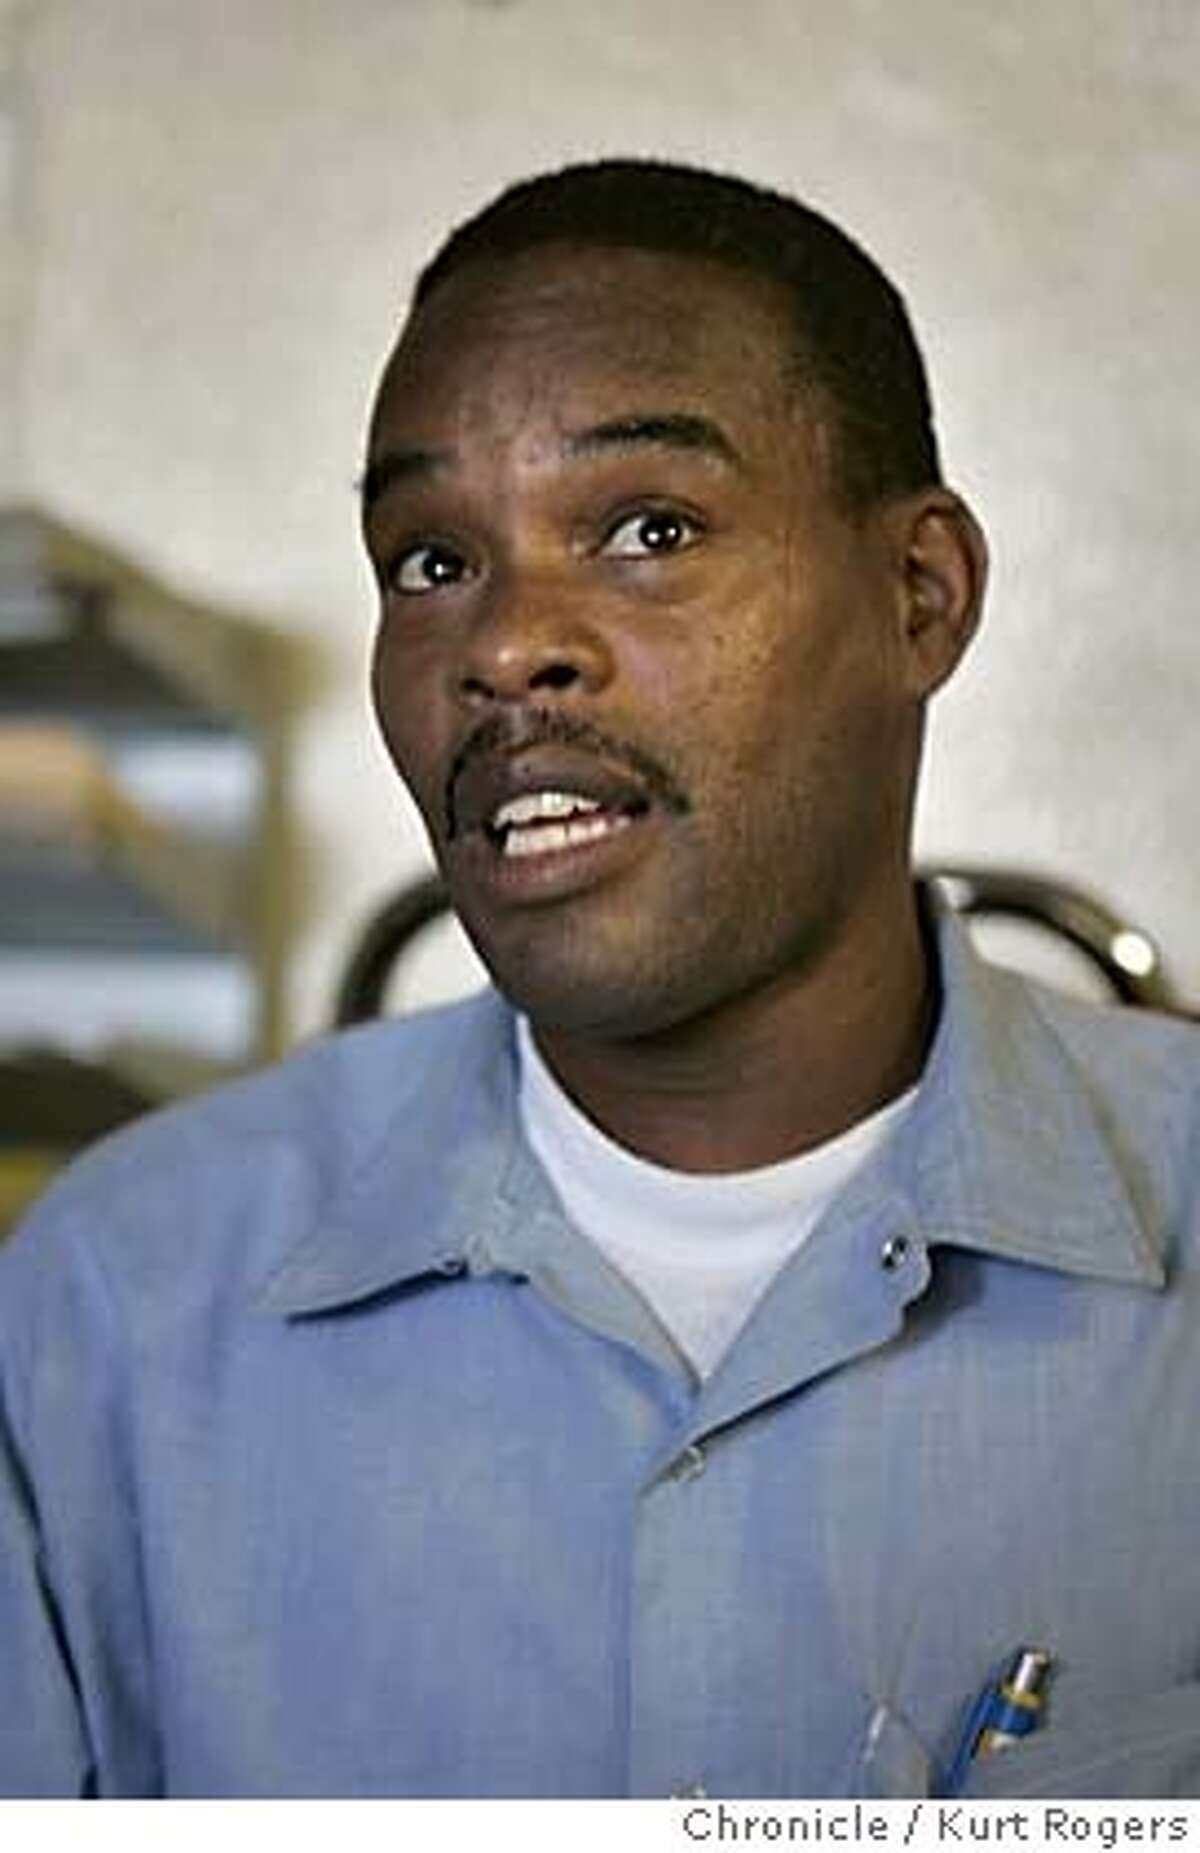 San Quentin inmate Olish Tunstall 39 serving a life term with the Possibility of parole takes part in the program tutors and students . Inmates at San Quentin had a "bake sale" for literacy?!? Yep. The members of San Quentin's inmate-to-inmate tutoring program sold food to raise money in support of literacy, and are poised to hand a $1,000 check over to the ailing Salinas Free Library (and another $500 for literacy services in Marin SANQUENTIN20_0037_kr.JPG 7/19/05 in SAN QUENTIN,CA. KURT ROGERS/THE CHRONICLE MANDATORY CREDIT FOR PHOTOG AND SF CHRONICLE/ -MAGS OUT